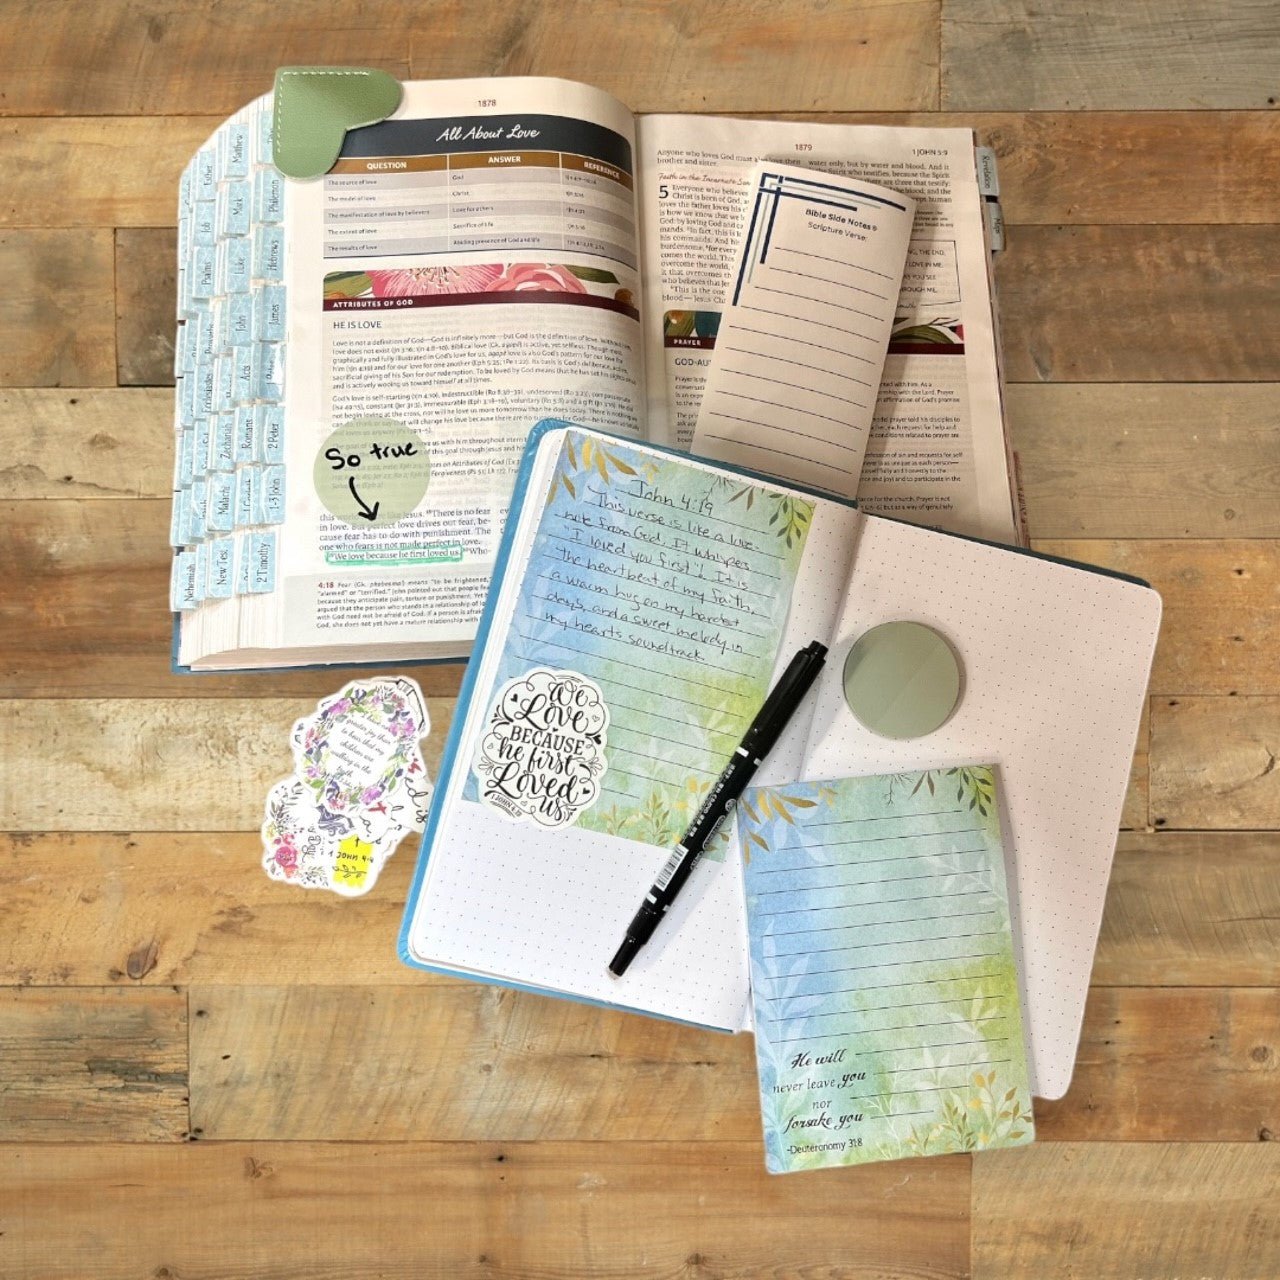 Faithful Beginnings Journaling Kit – Blessed Be Boutique